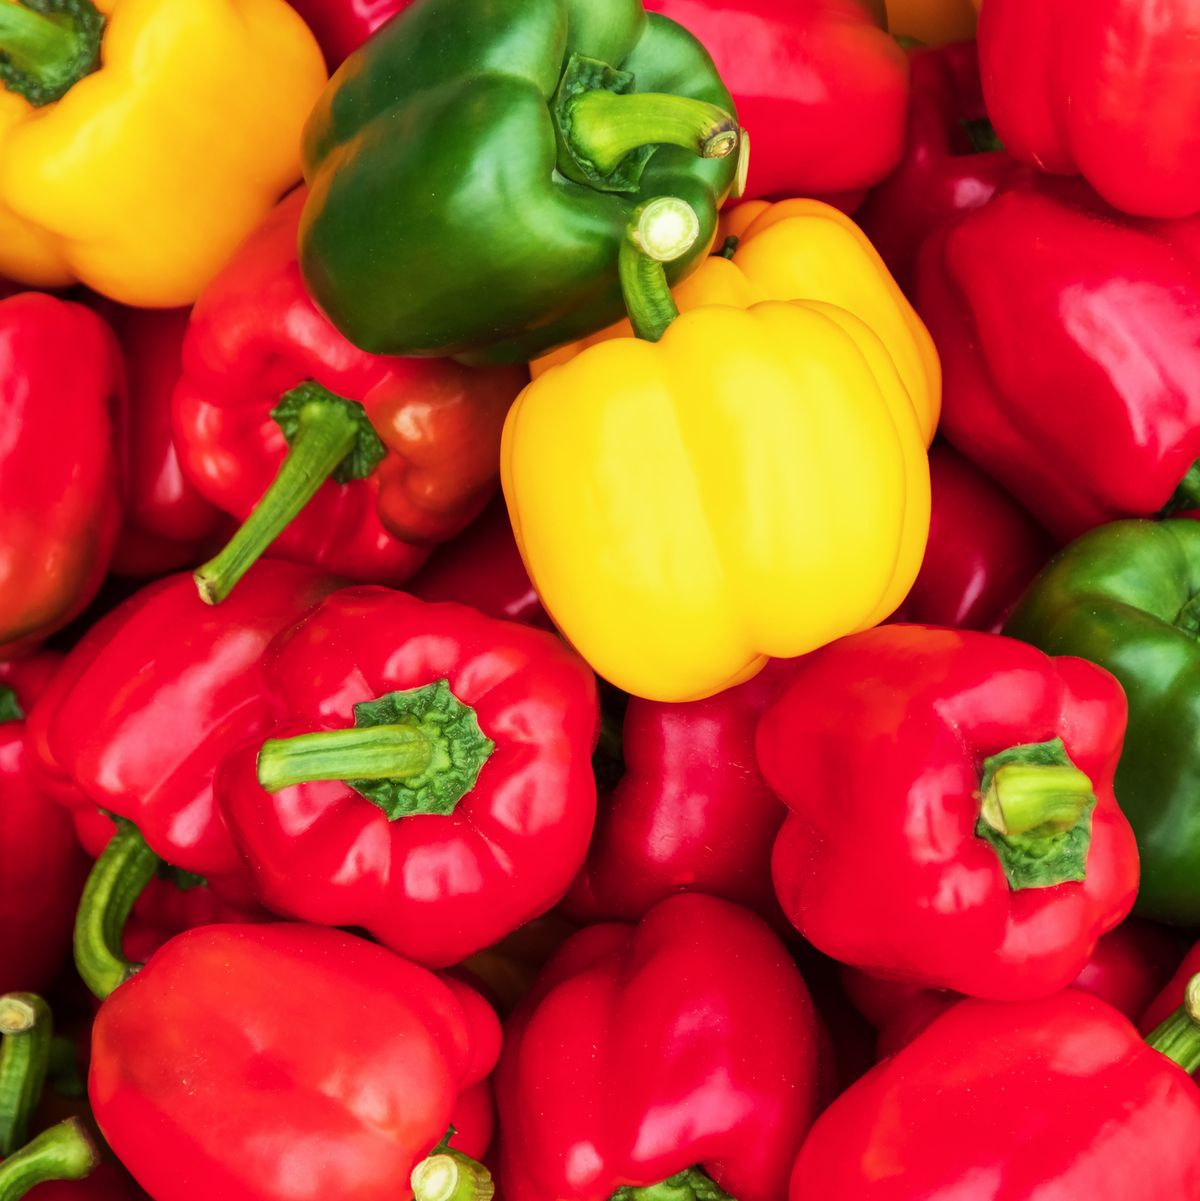 https://hips.hearstapps.com/hmg-prod/images/sweet-pepper-colorful-sweet-bell-peppers-natural-royalty-free-image-1611355757.?crop=0.66635xw:1xh;center,top&resize=1200:*